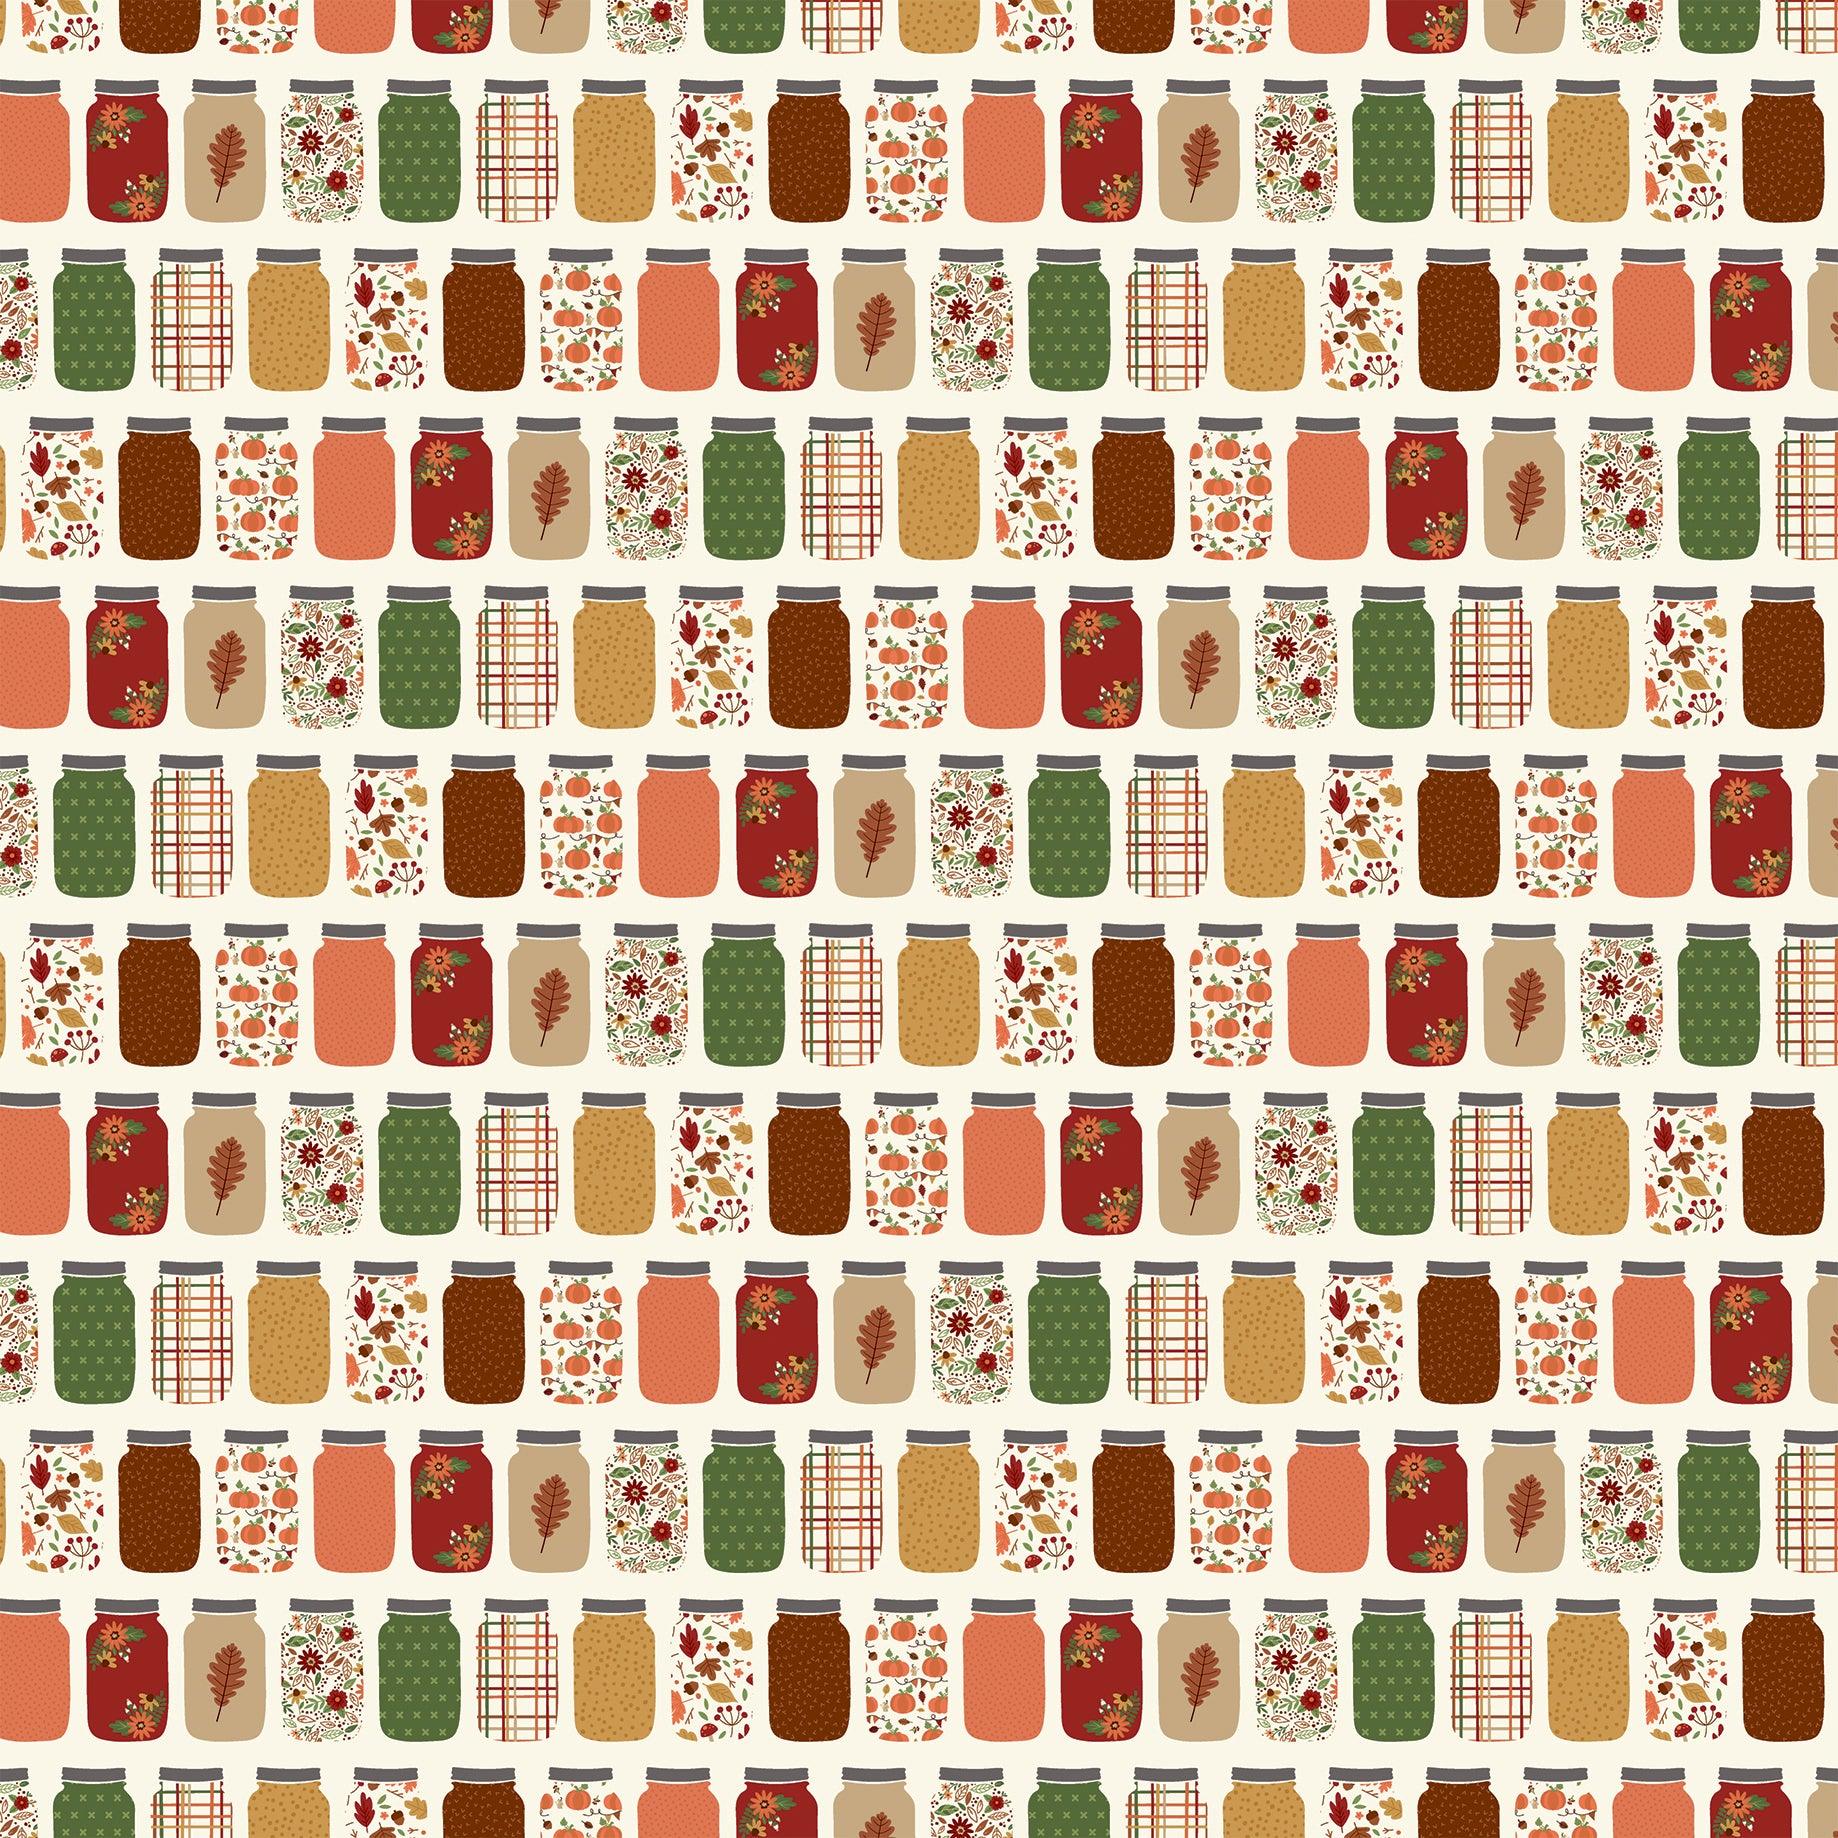 I Love Fall Collection Jars Of Fall 12 x 12 Double-Sided Scrapbook Paper by Echo Park Paper - Scrapbook Supply Companies